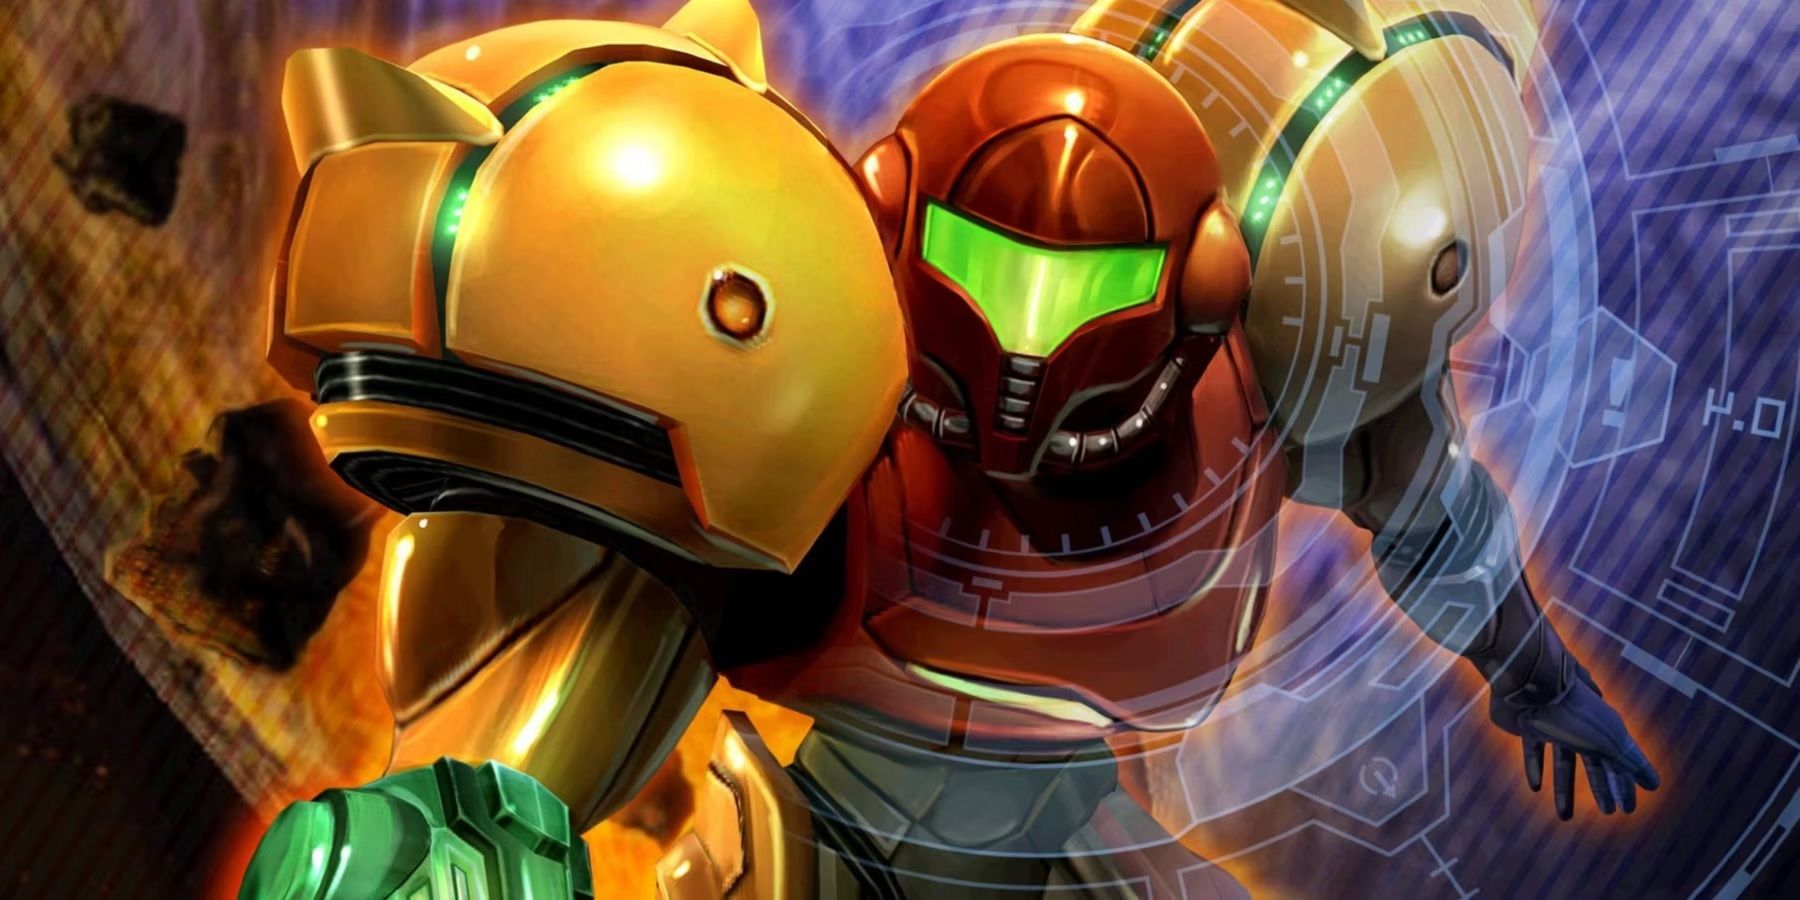 The Chronological Order of Metroid Games Explained